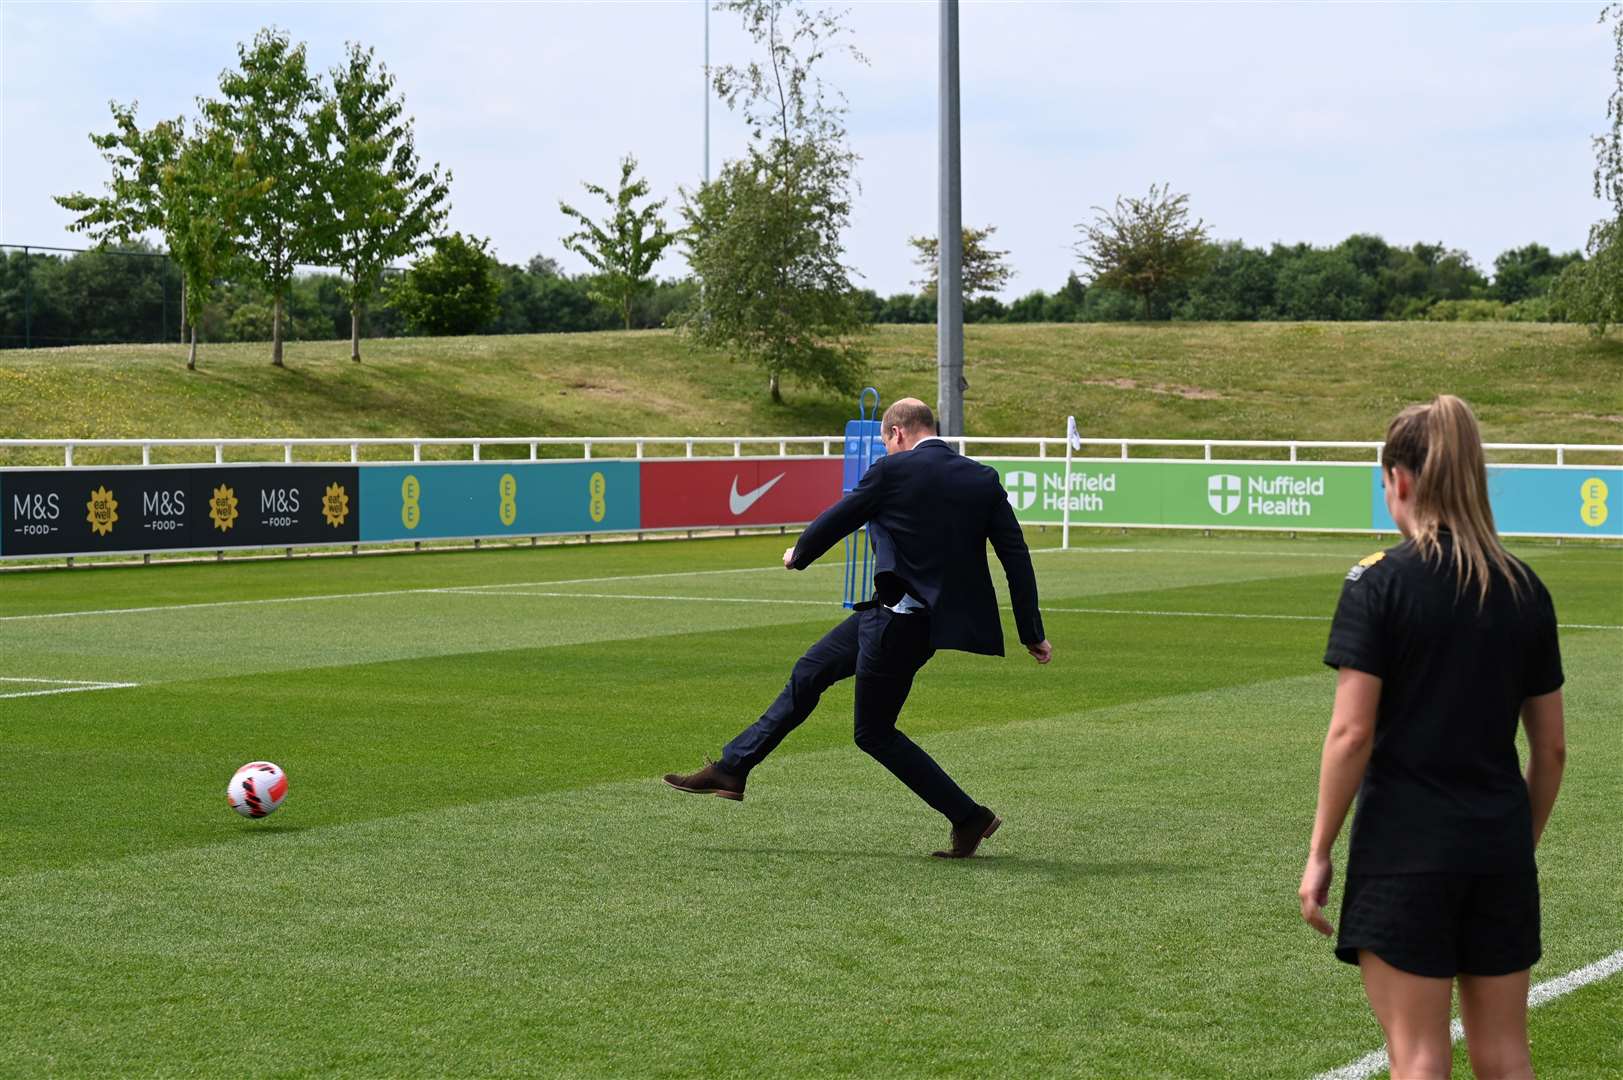 William shoots to score a goal during a visit to St George’s Park to meet with the England women’s team ahead of Uefa Women’s Euro 2022 (Paul Ellis/PA)